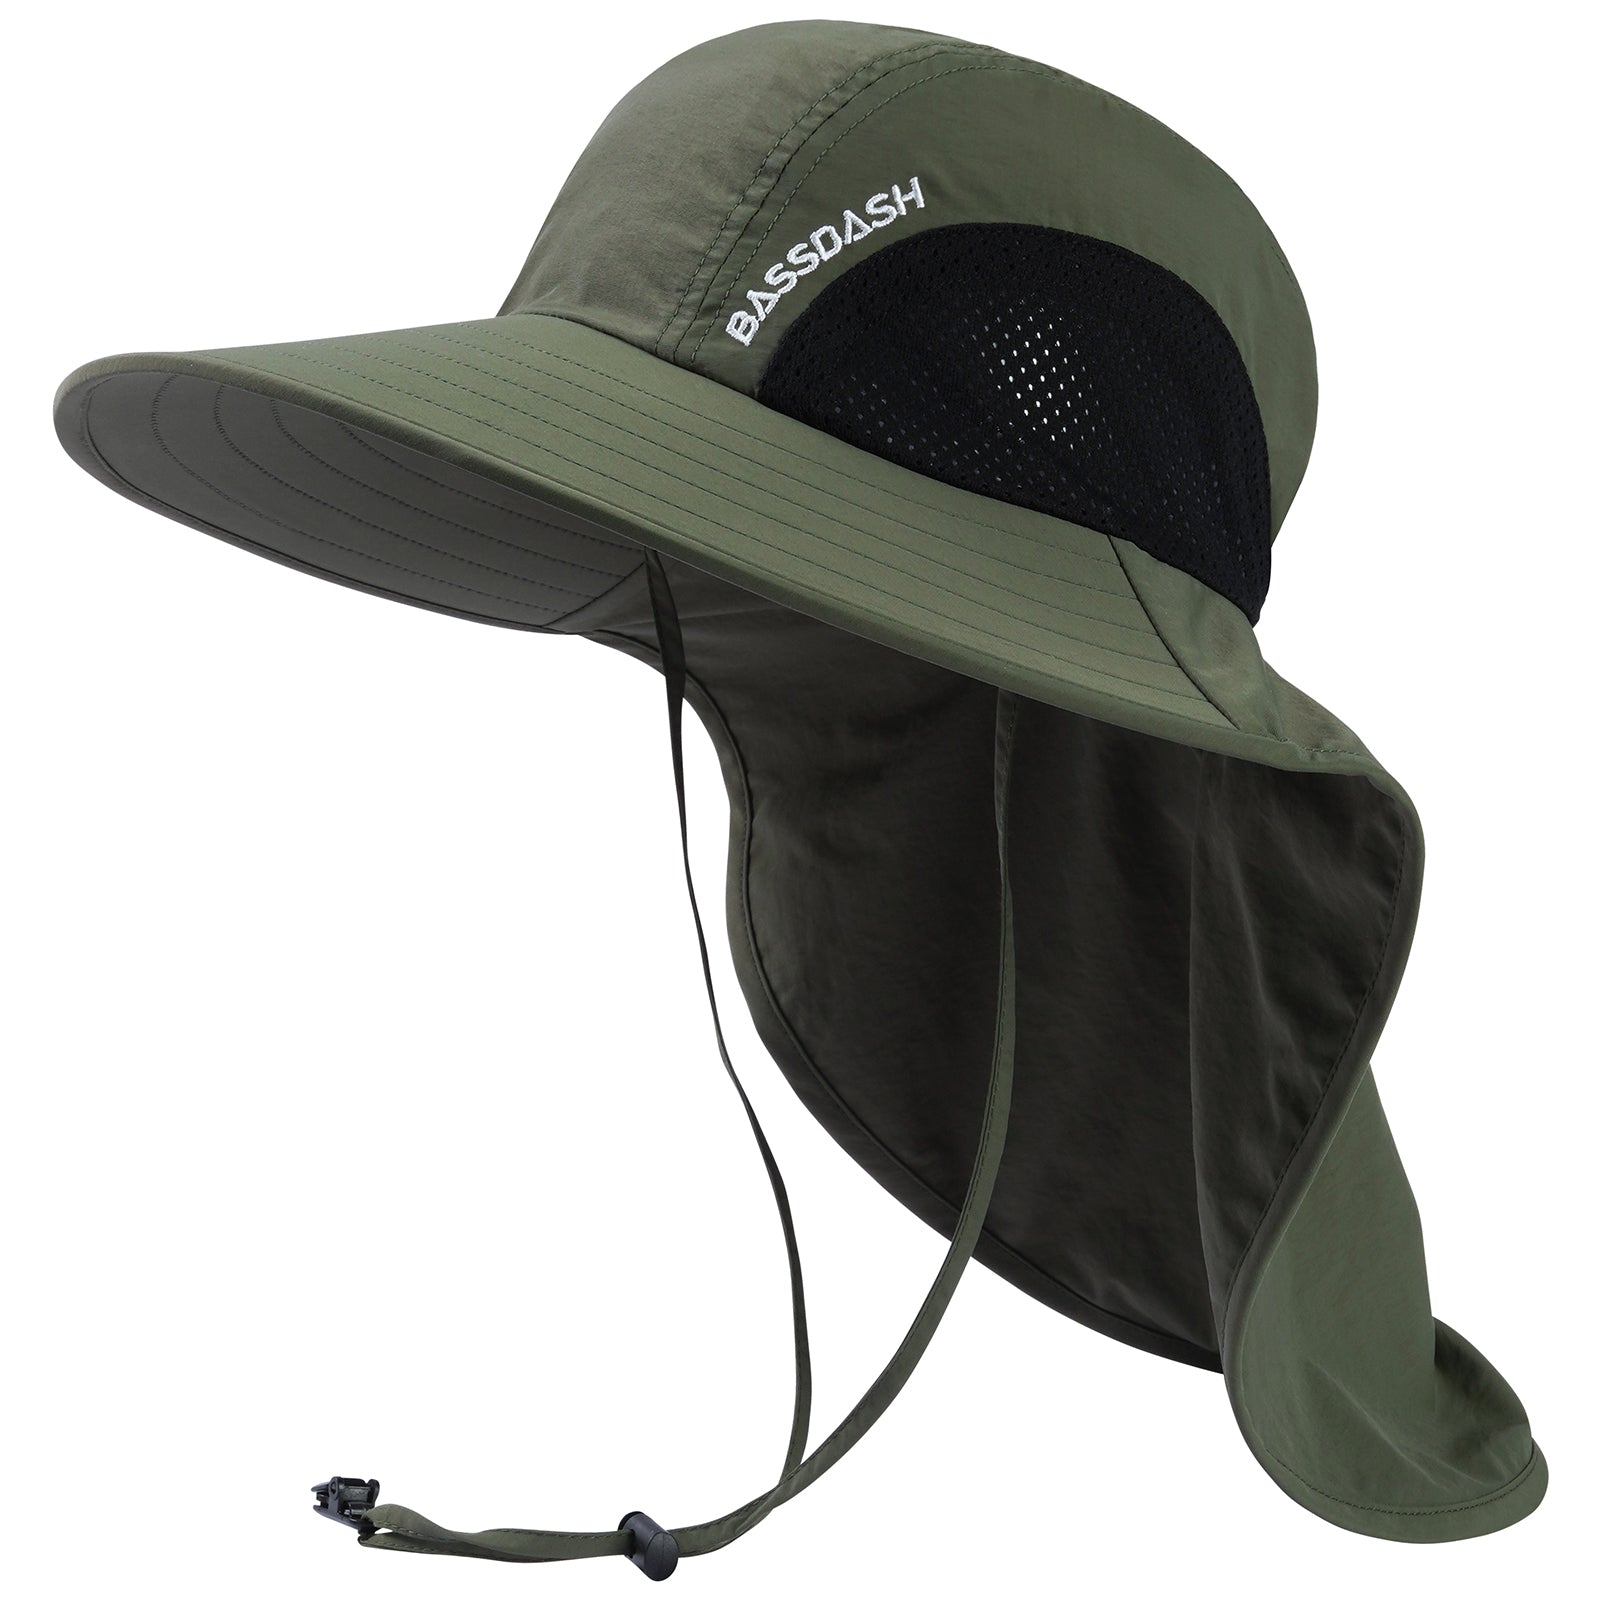 Unisex UPF 50+ Water Resistant Sun Hat with Neck Flap FH06, Army Green